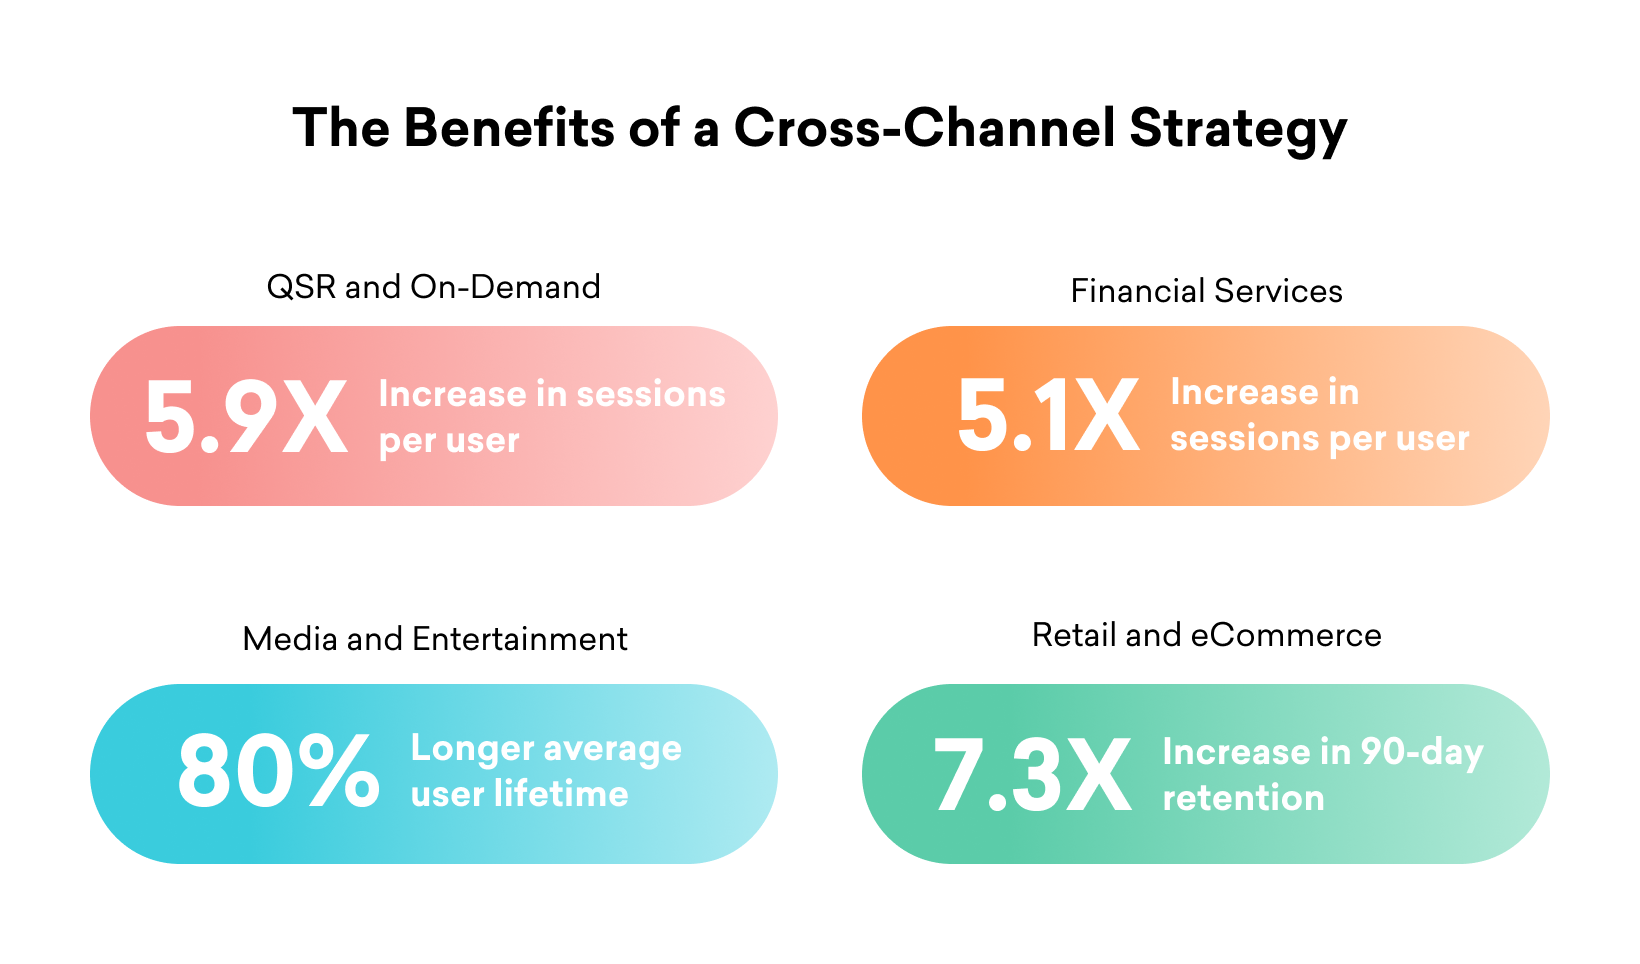 Why Is a Cross-Channel Strategy Important?